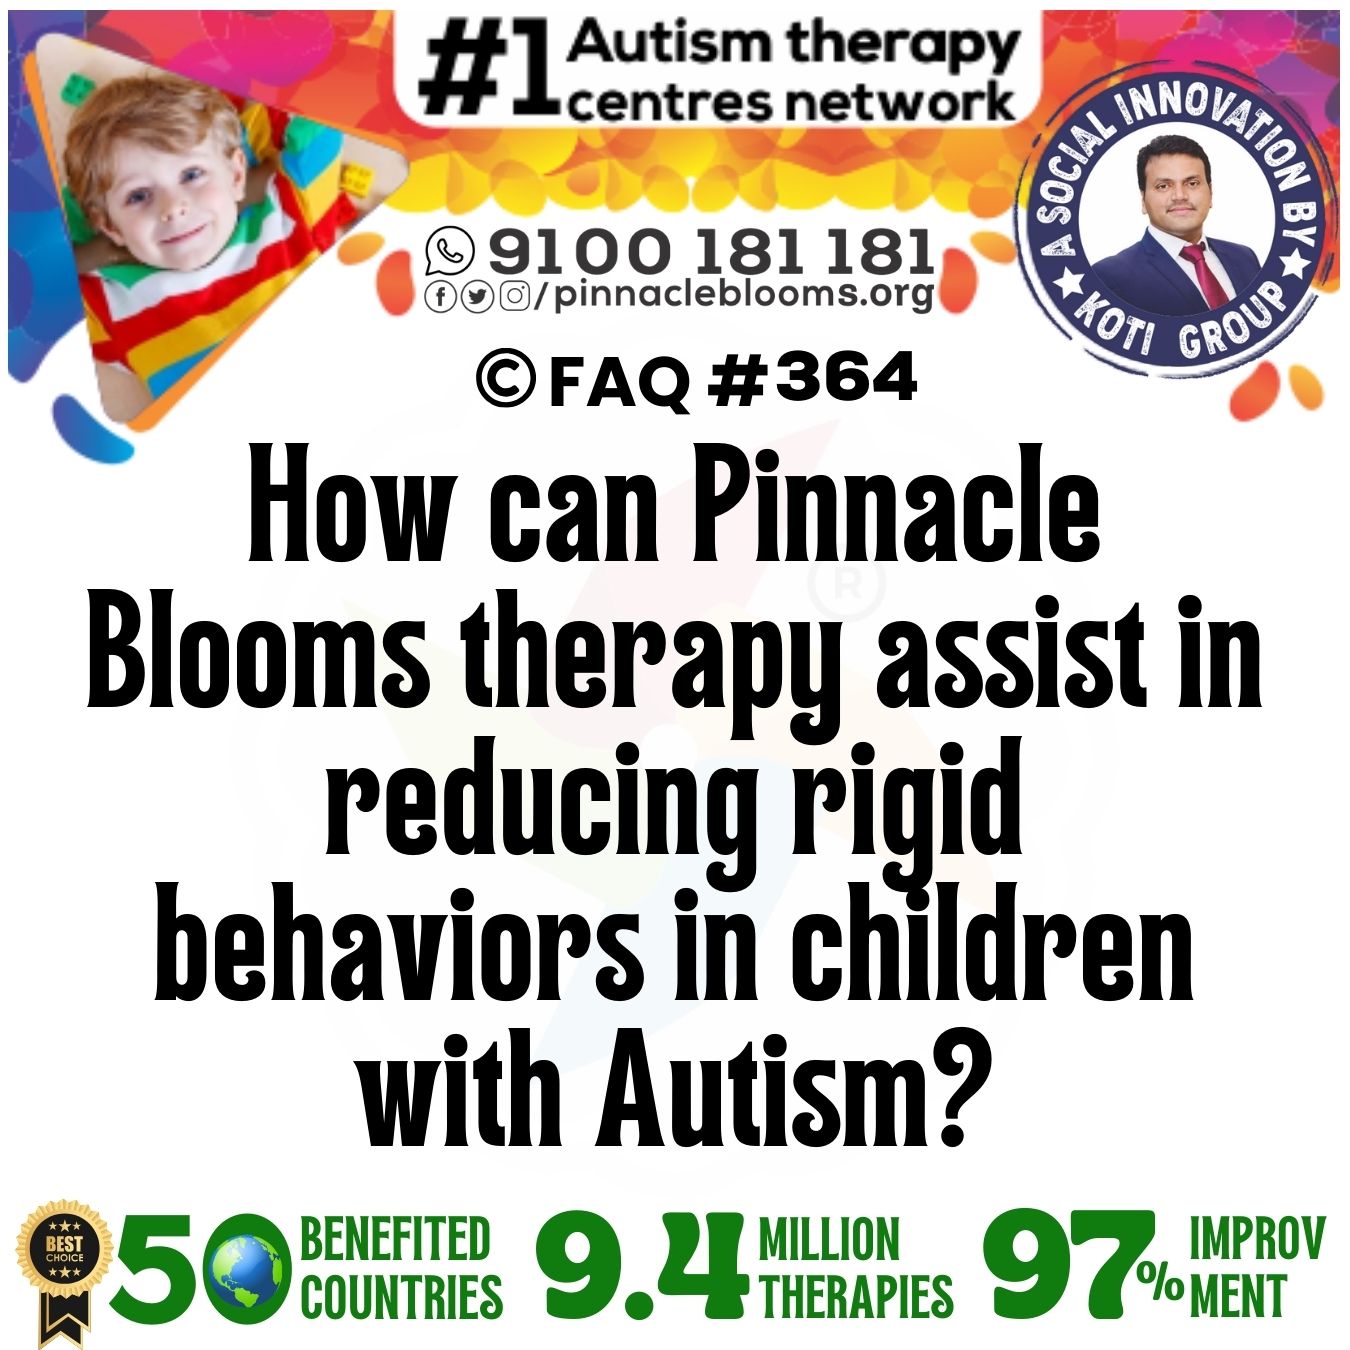 How can Pinnacle Blooms therapy assist in reducing rigid behaviors in children with Autism?